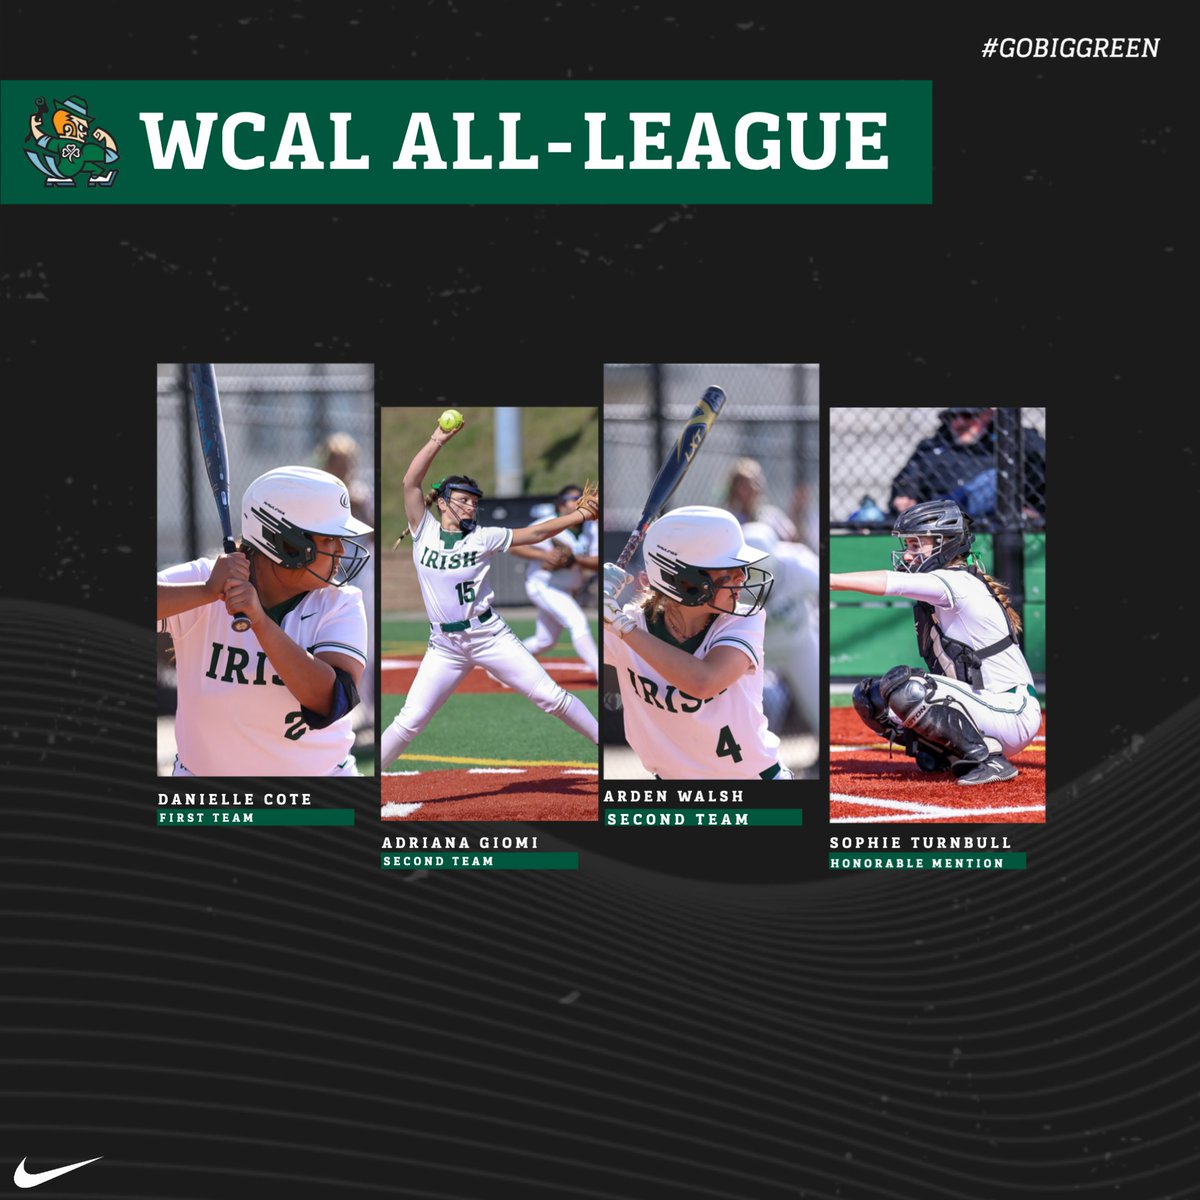 Congratulations to our Softball players who were awarded WCAL All-League honors.  Go Irish! ☘️

#HeartOfTheCity